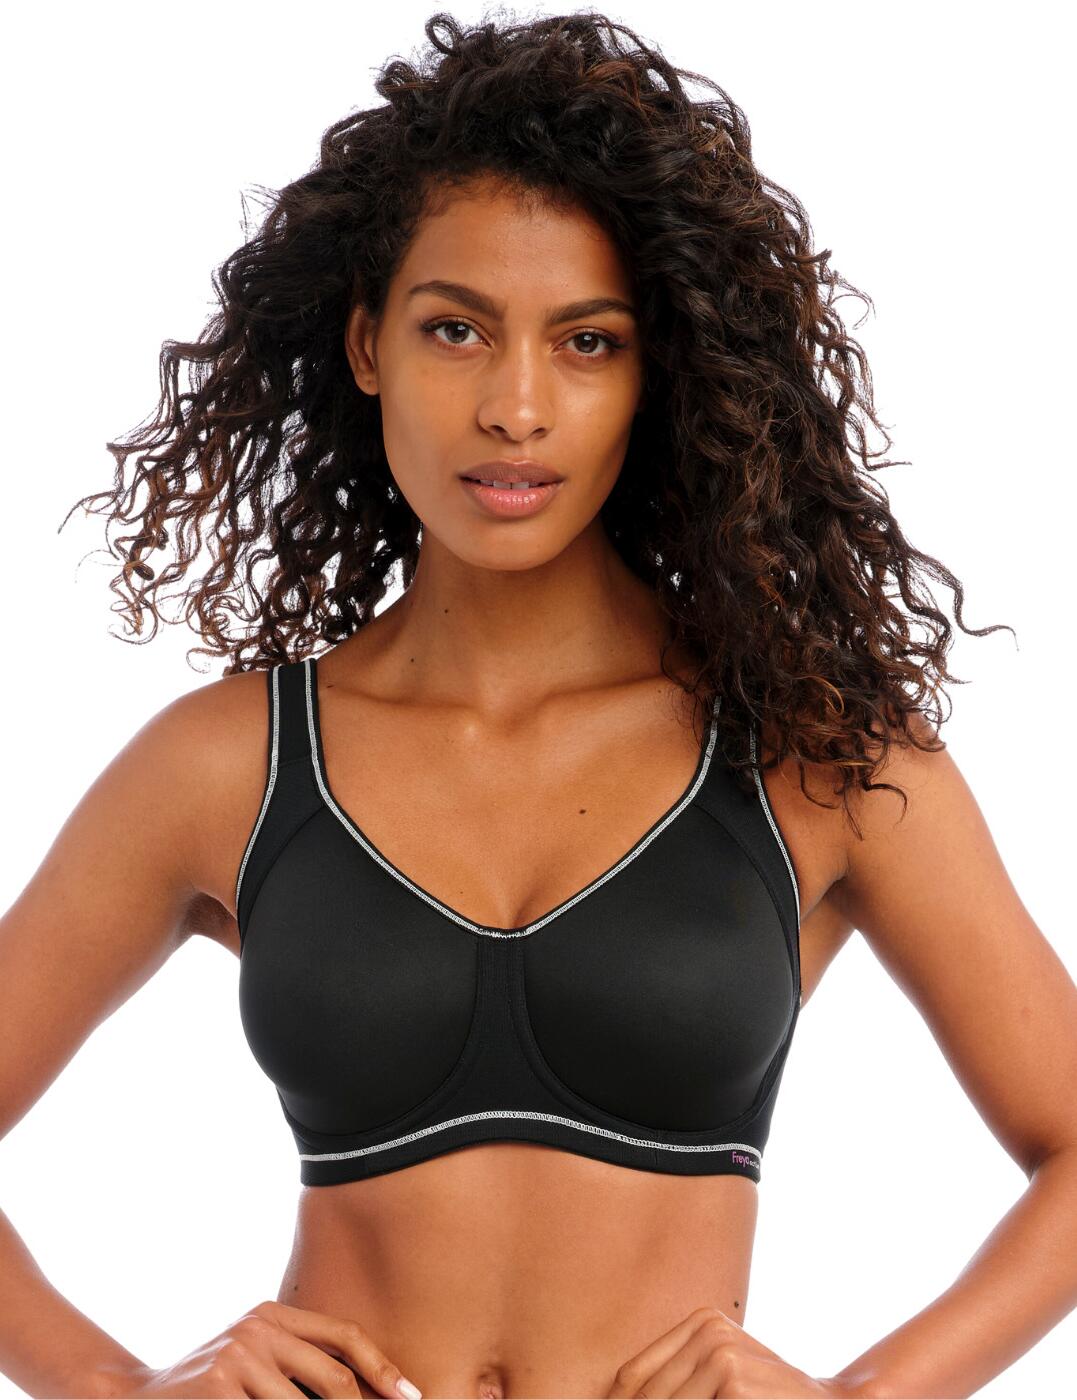 4892 Freya Active Sonic Moulded Sports Bra - 4892 Storm